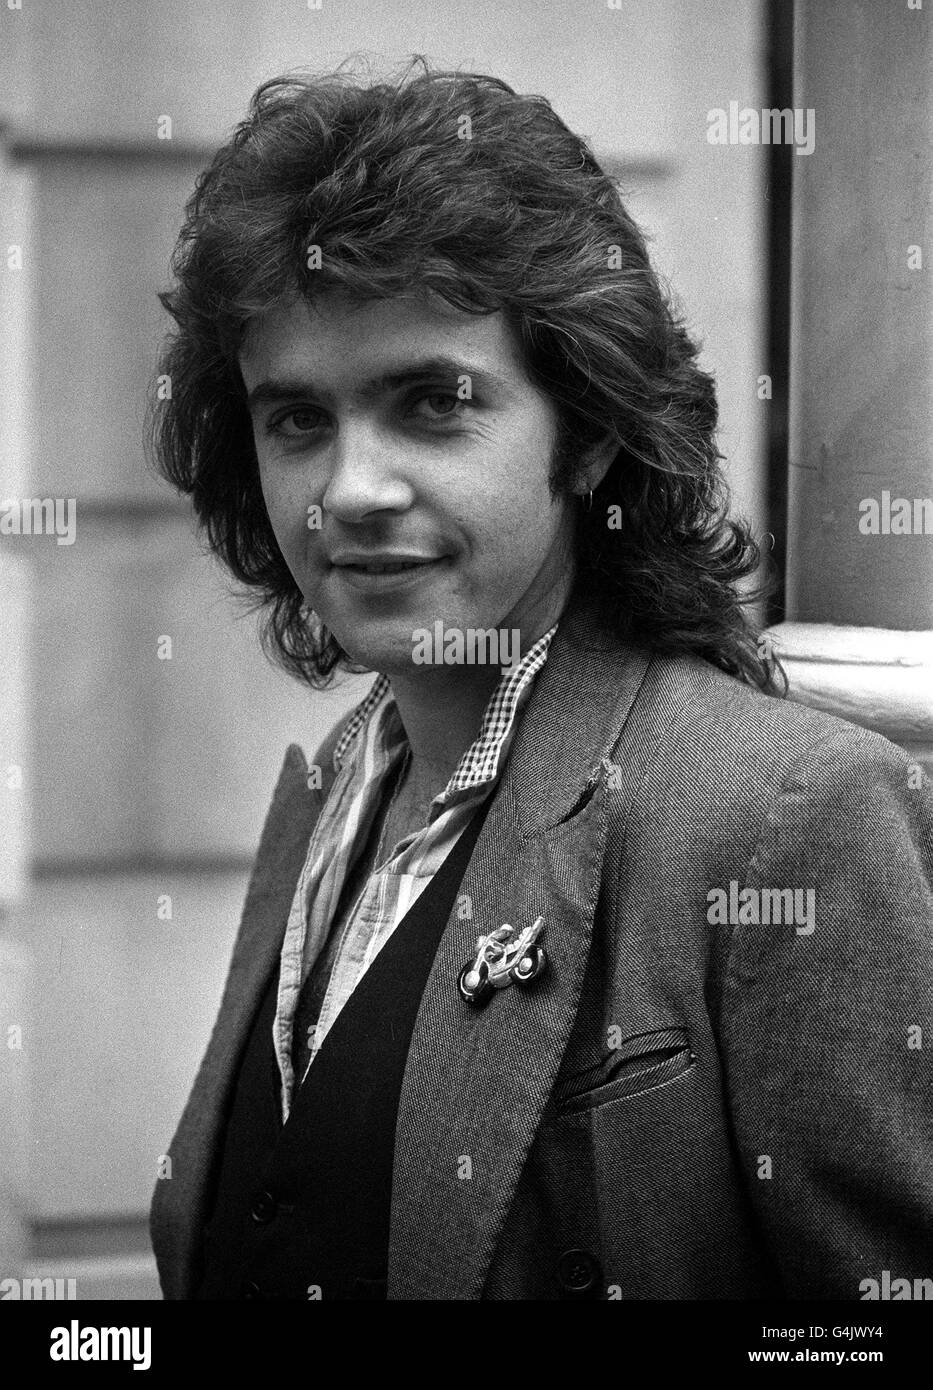 DAVID ESSEX. A LIBRARY FILE PICTURE OF POP SINGER DAVID ESSEX. Stock Photo